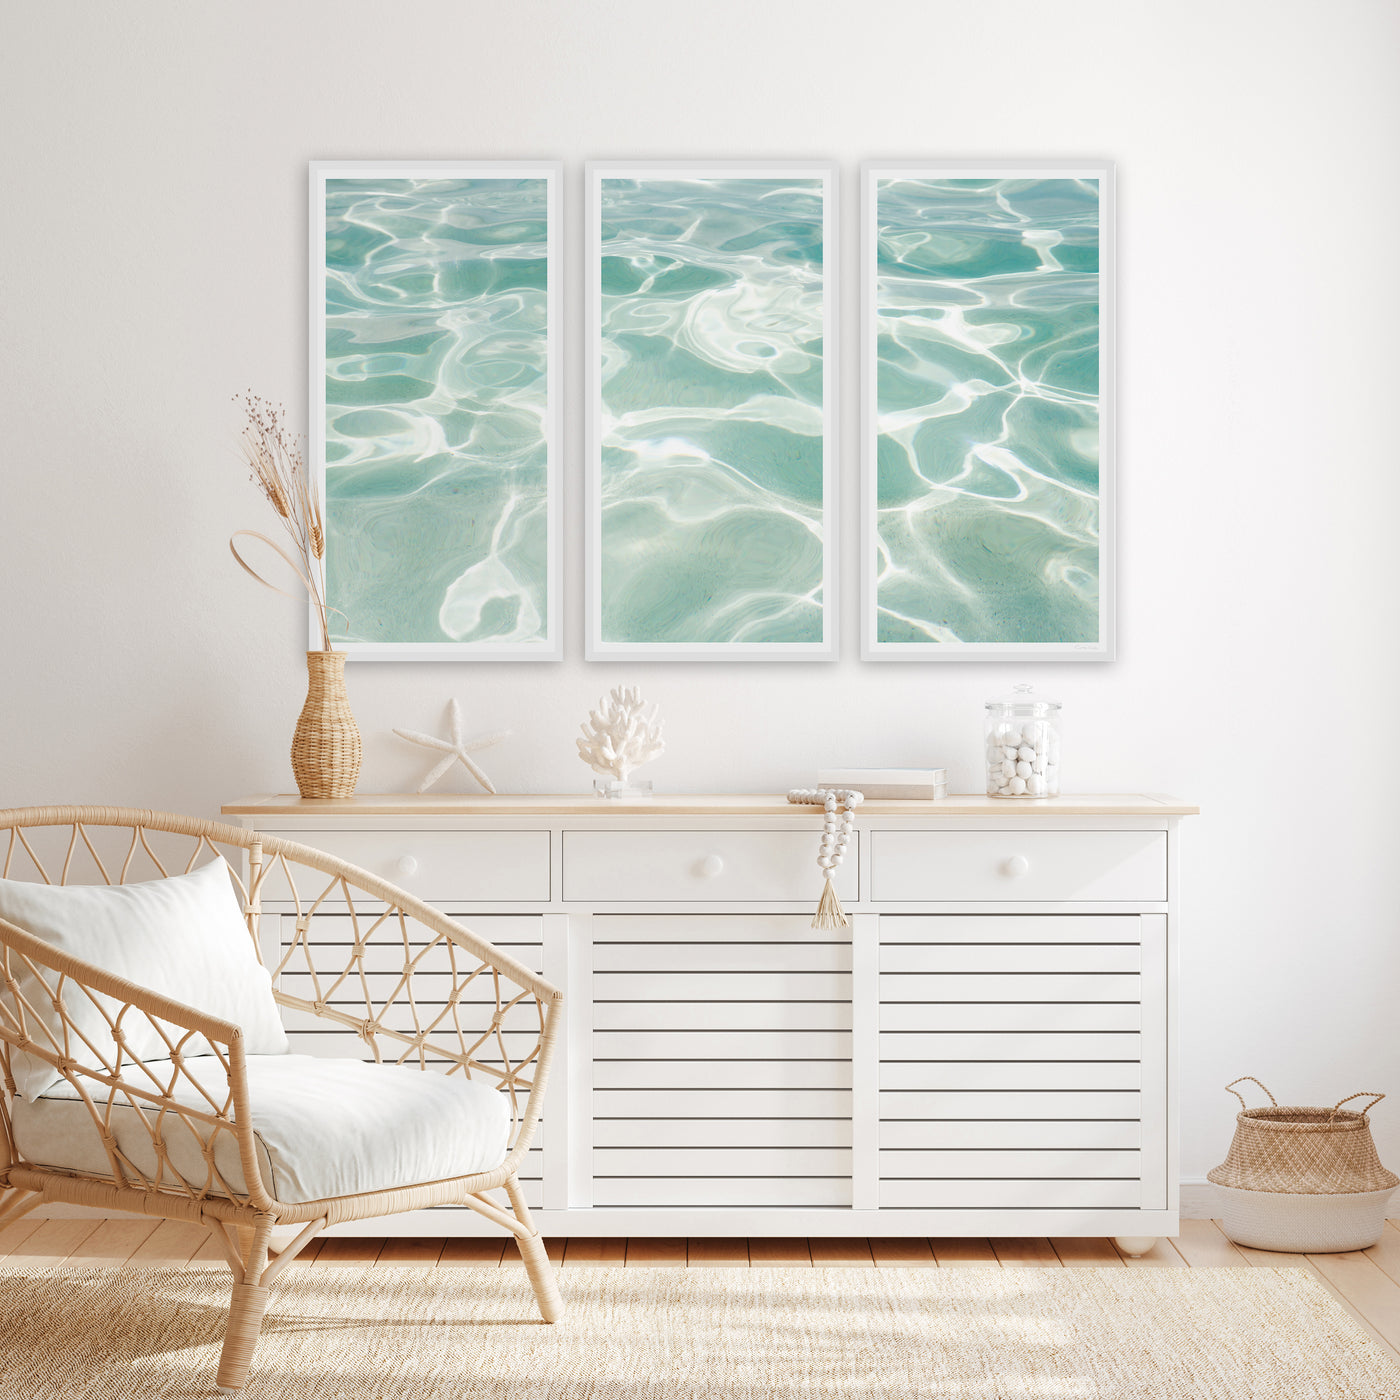 Caribbean Sea No 2 - Three piece wall art by Cattie Coyle Photography in beach house living room